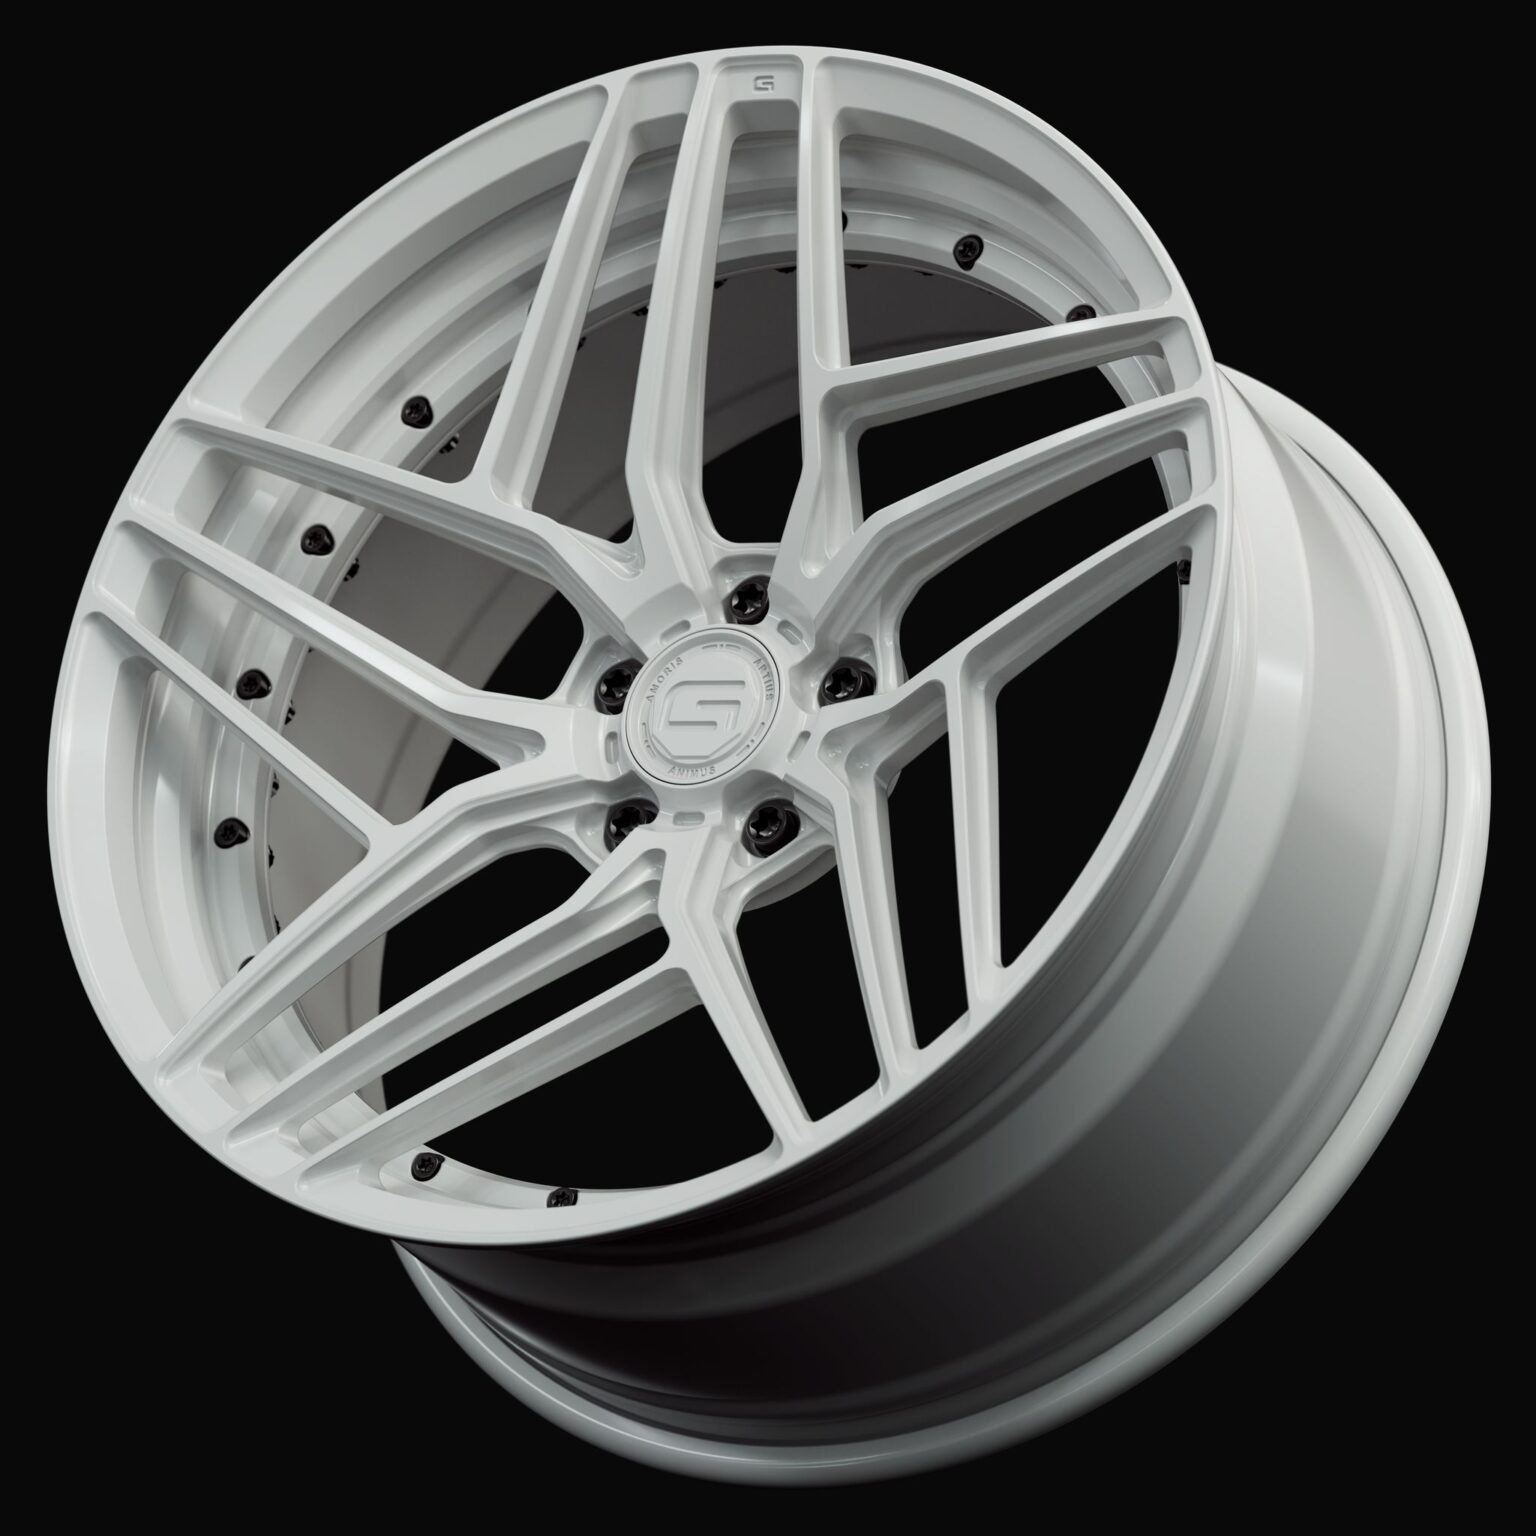 Three-quarter view of a white G58 duoblock wheel from Govad Forged Track series